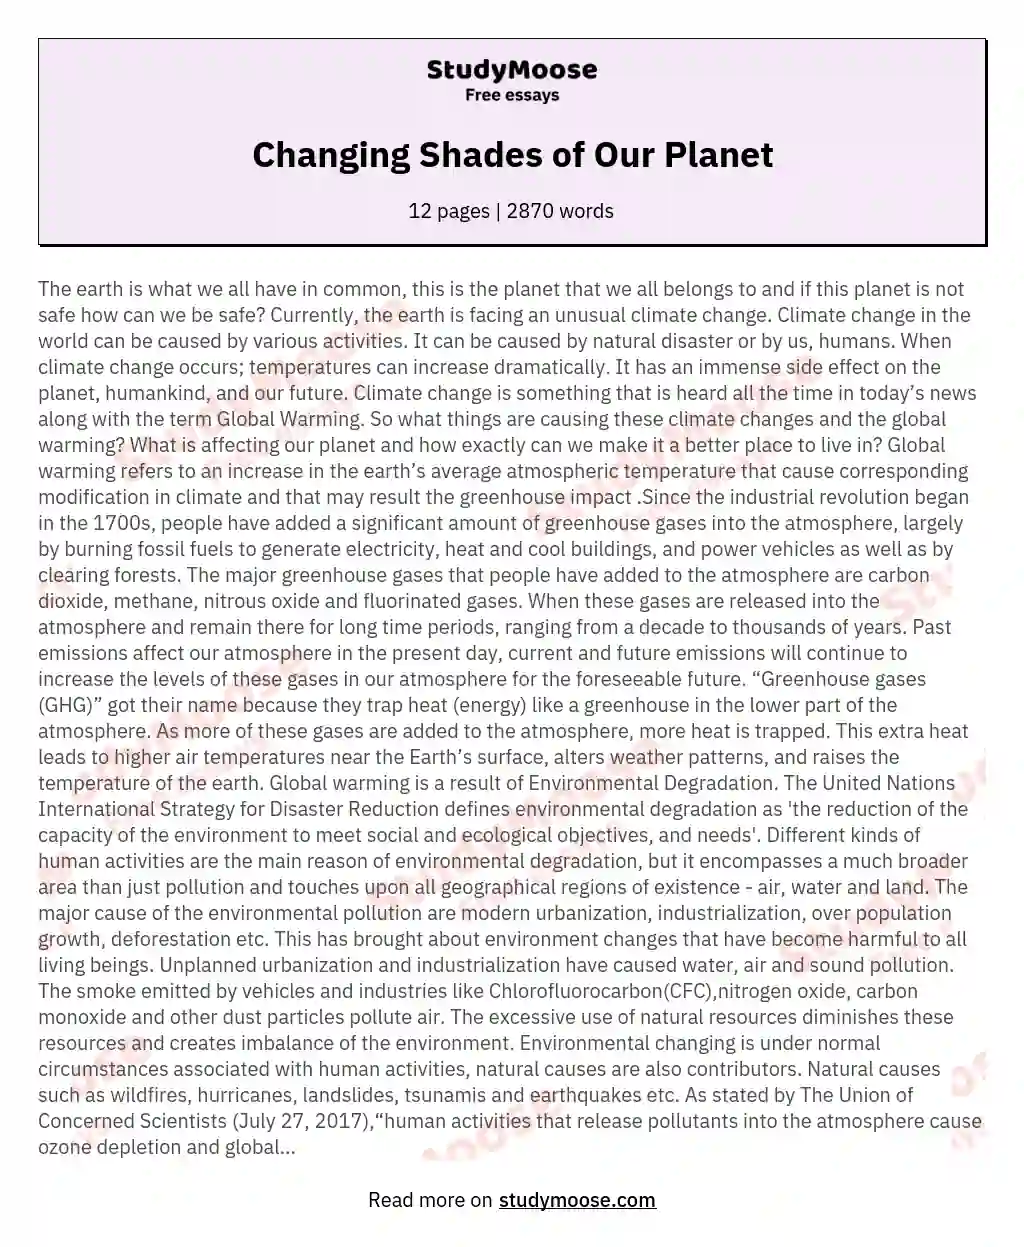 Changing Shades of Our Planet essay